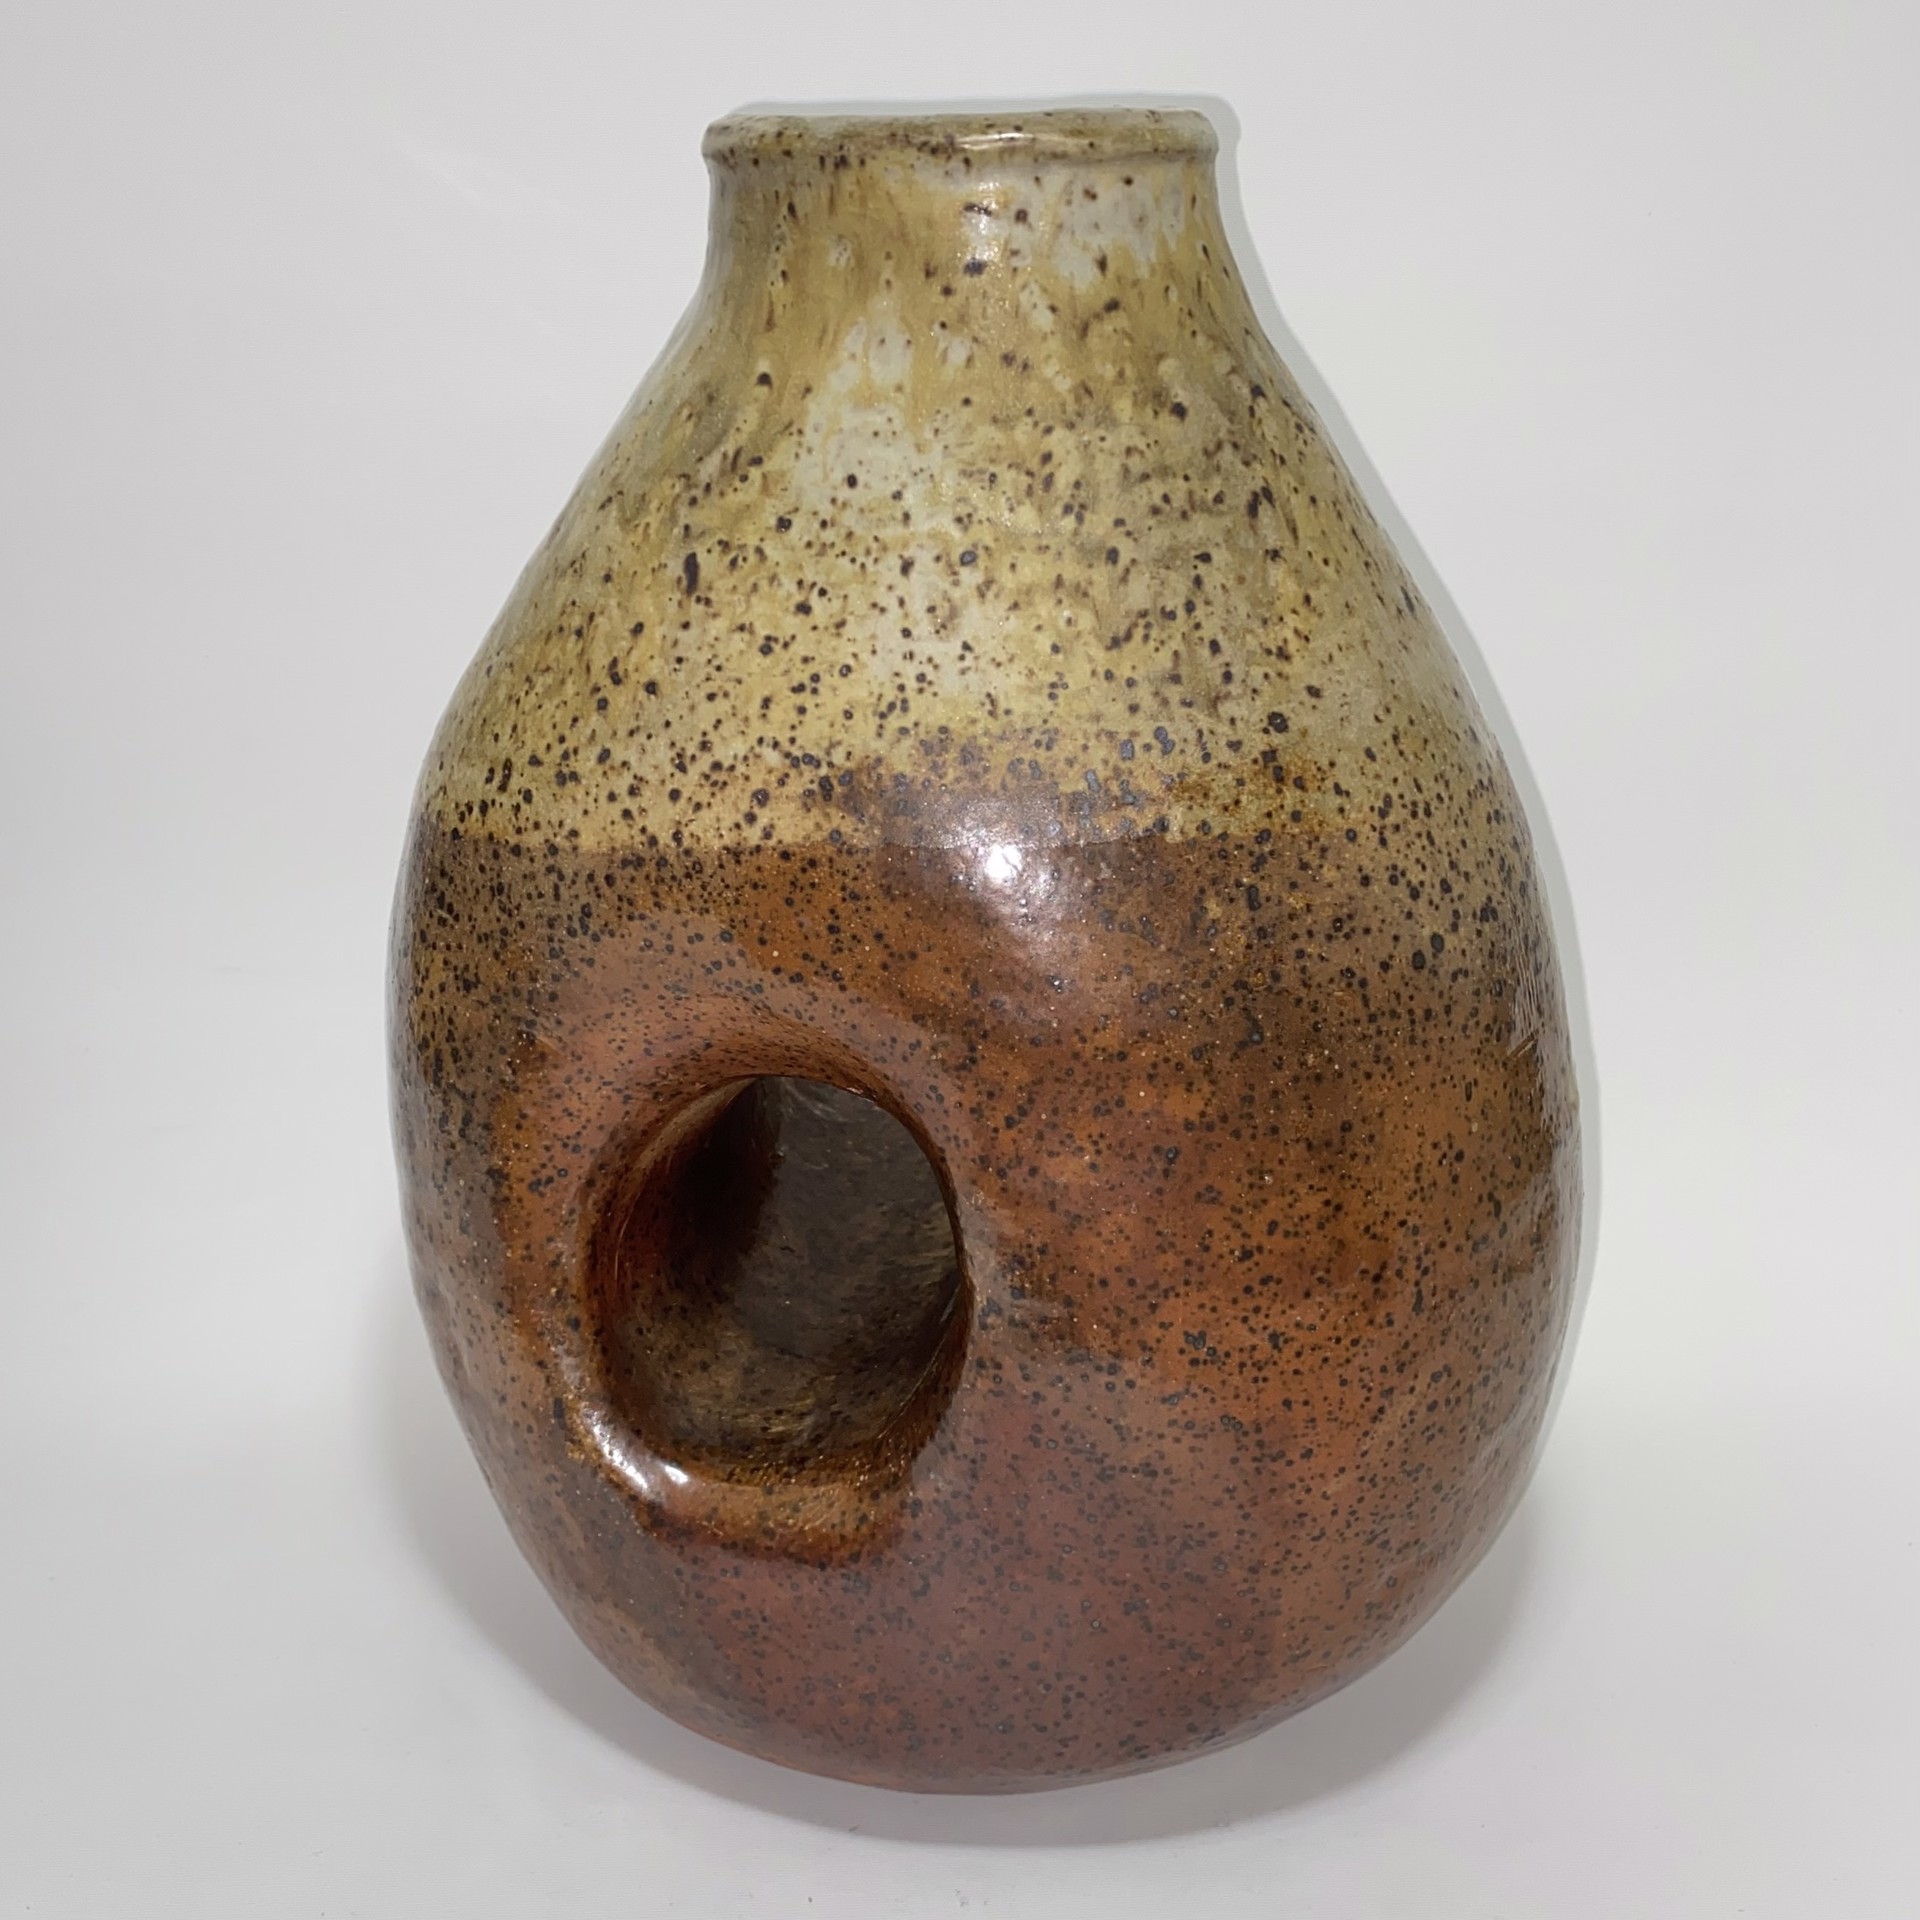 Wood-Fired Lacuna Pot 1 by Mary Delmege